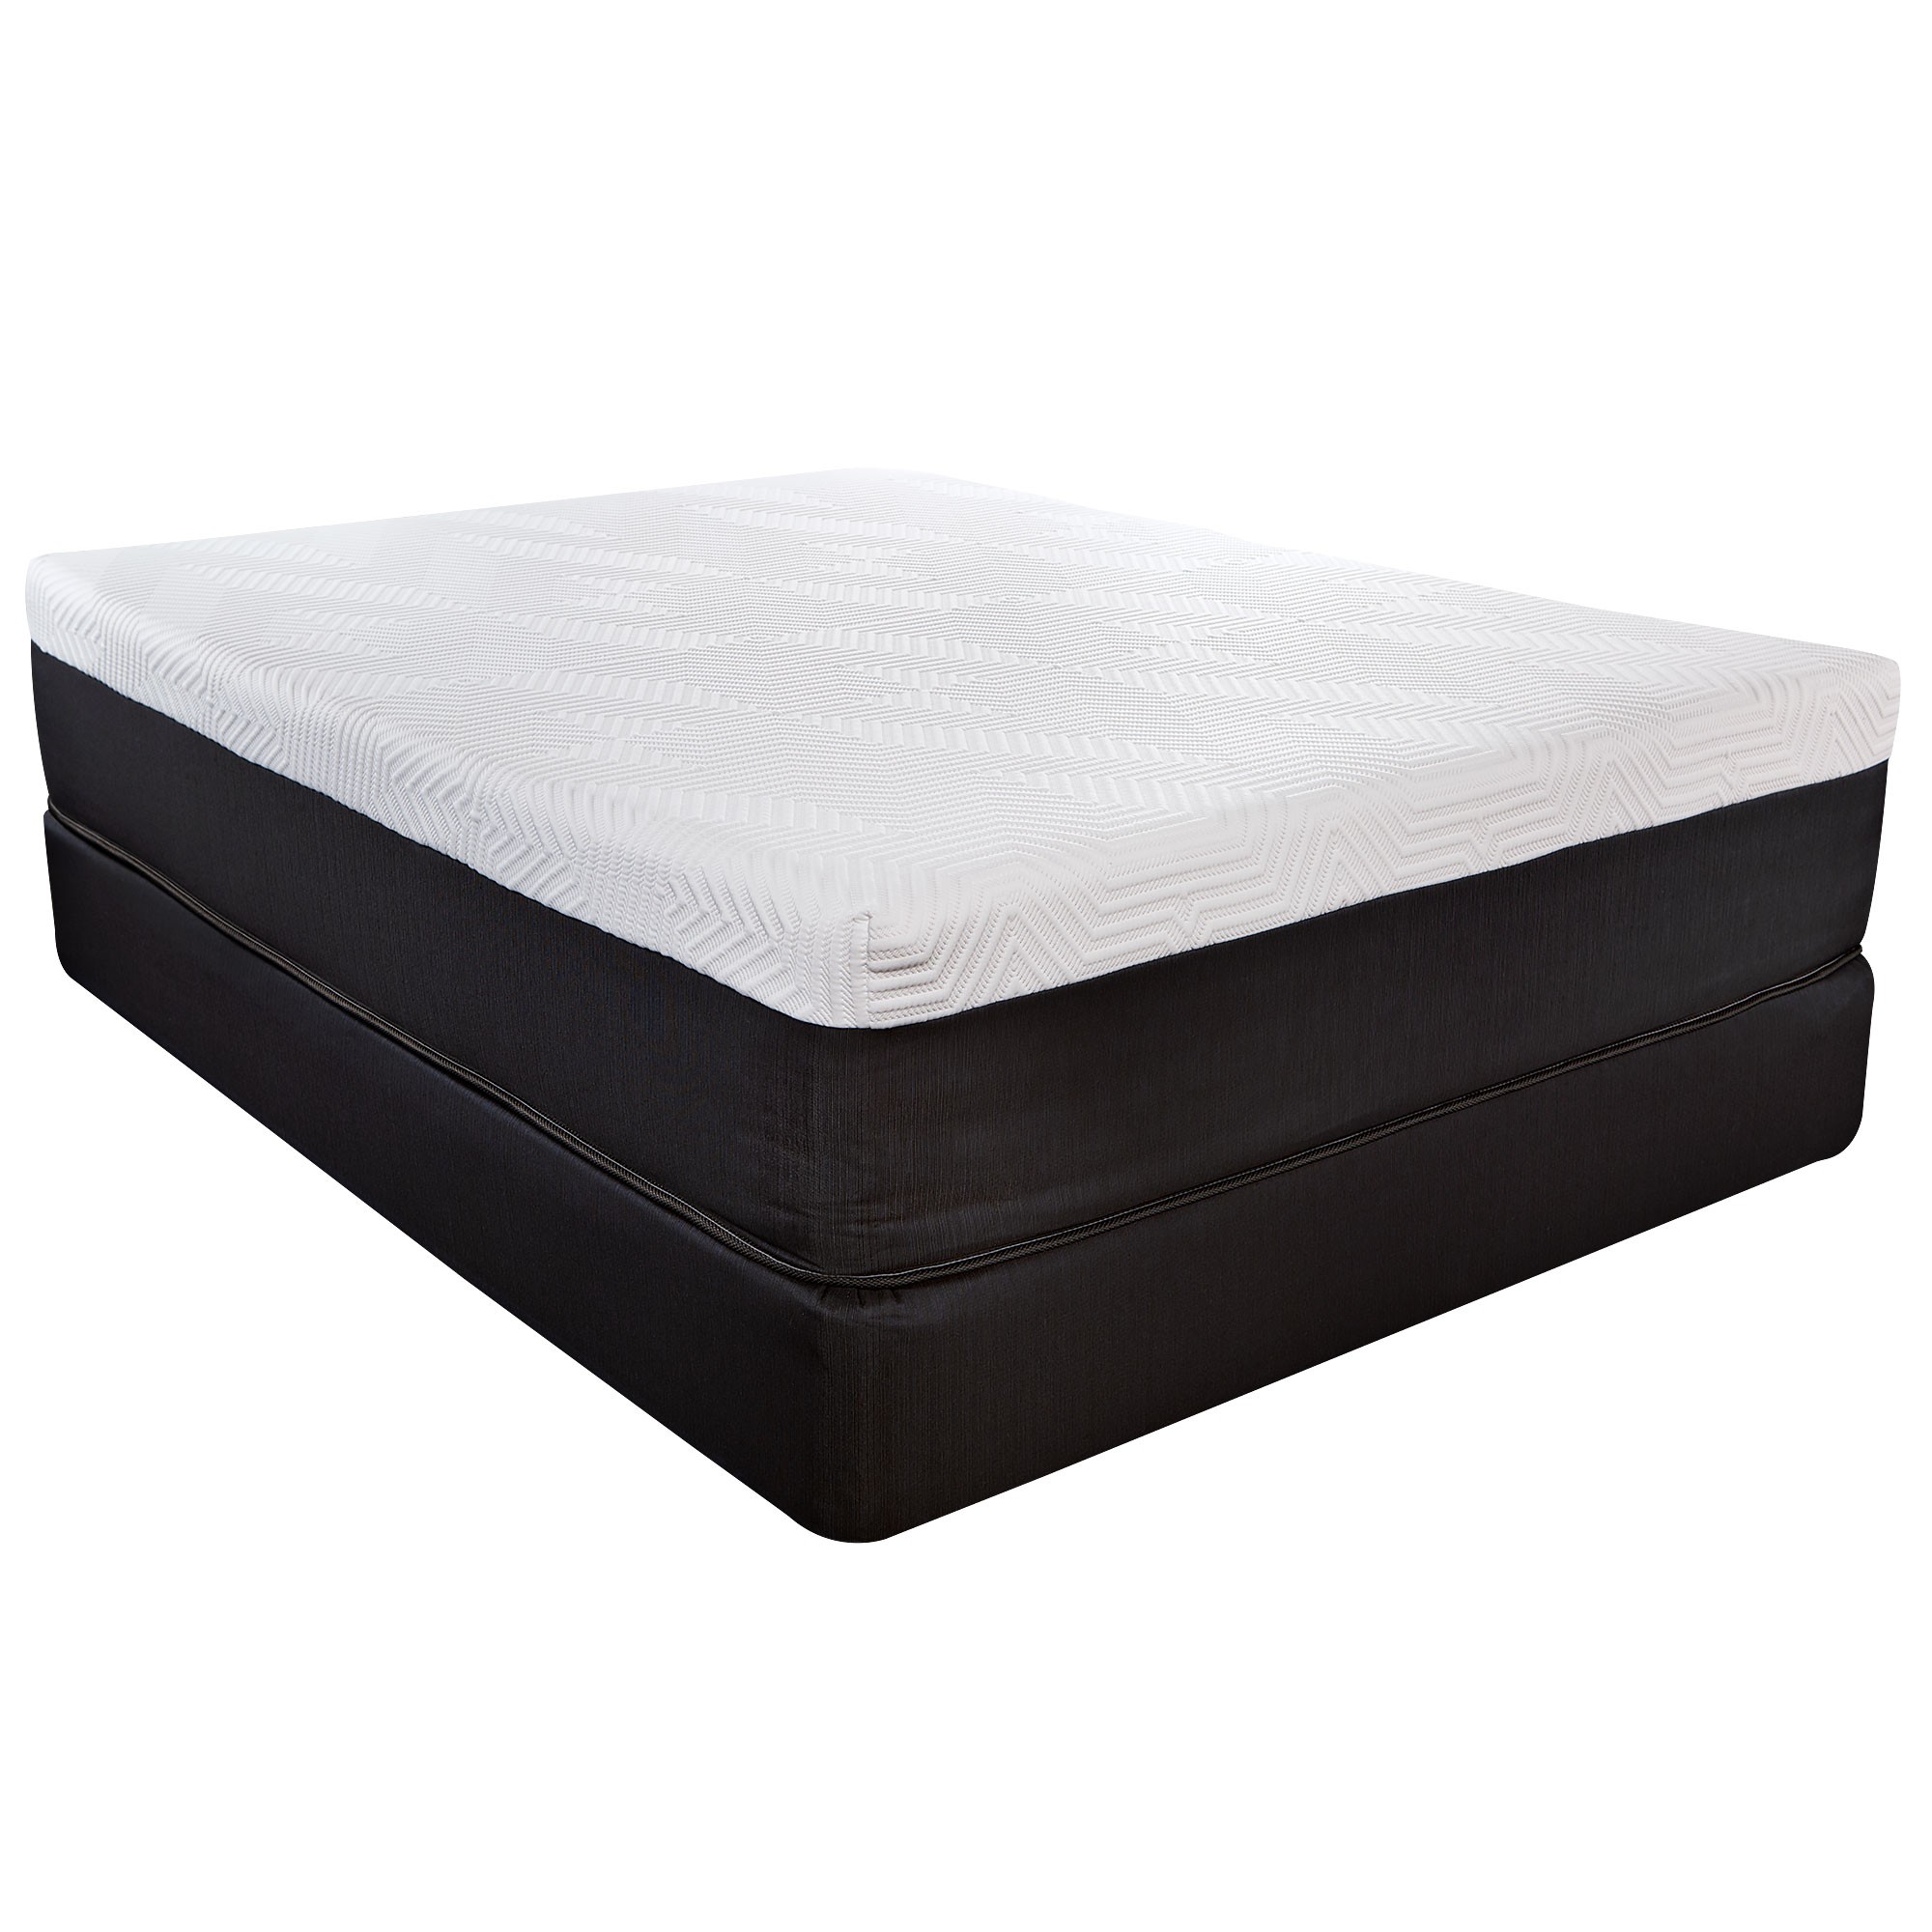 14" Hybrid Lux Memory Foam And Wrapped Coil Mattress Twin-391628-1